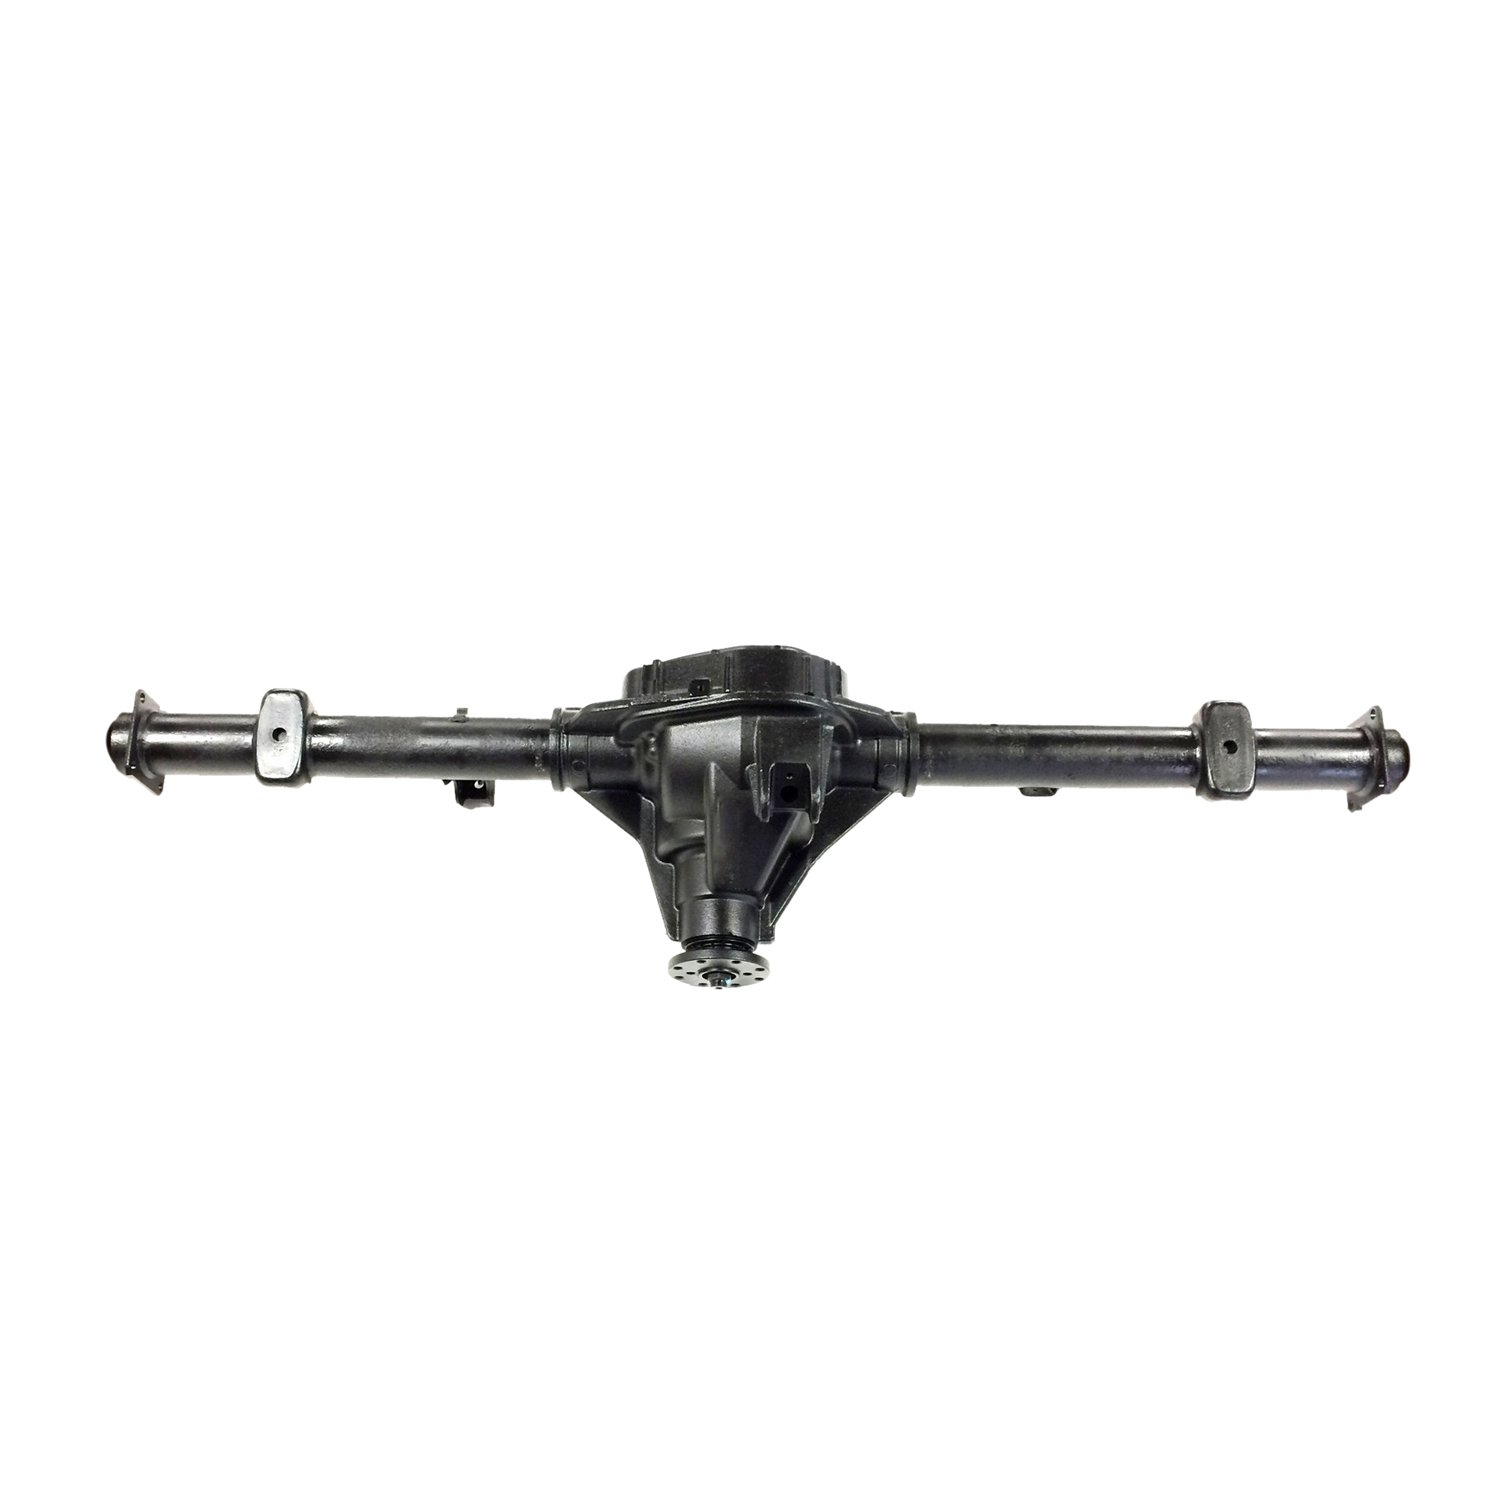 Remanufactured Axle Assembly for Ford 9.75" 1997-00 Ford E150, 3.55 Ratio, Posi